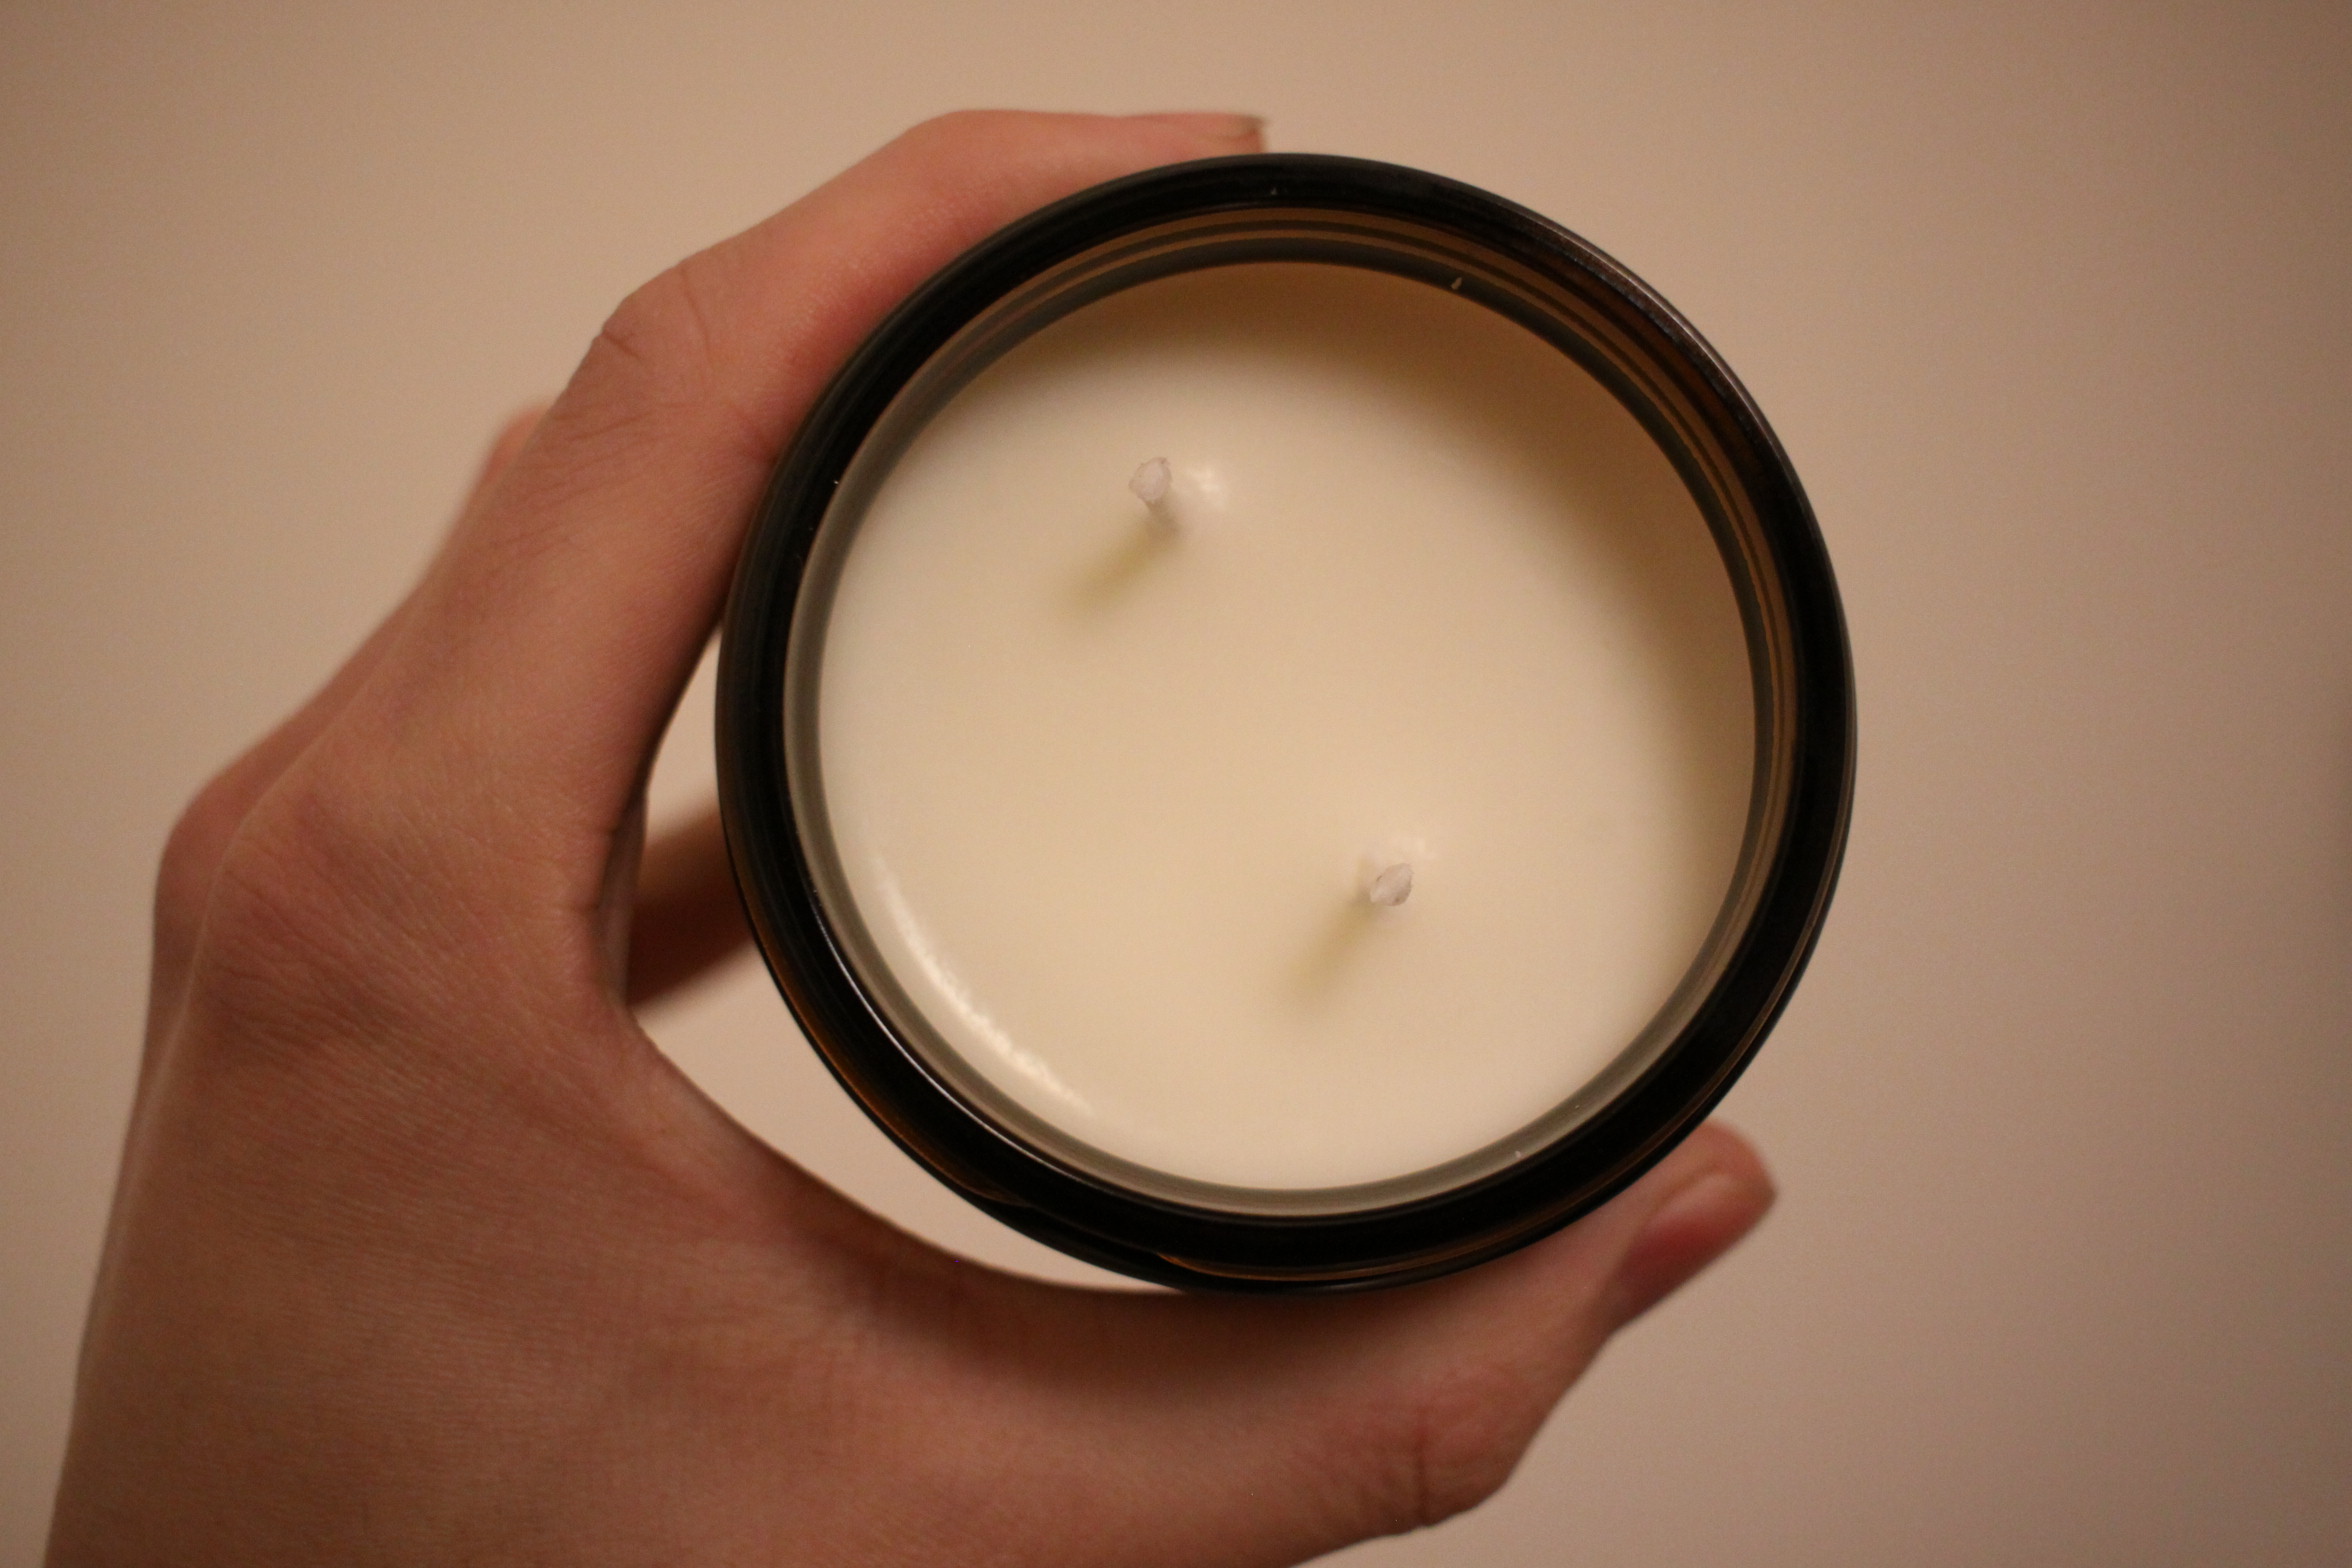 Strange candle surface. 464 soy wax heated to 185F, fragrance ~7